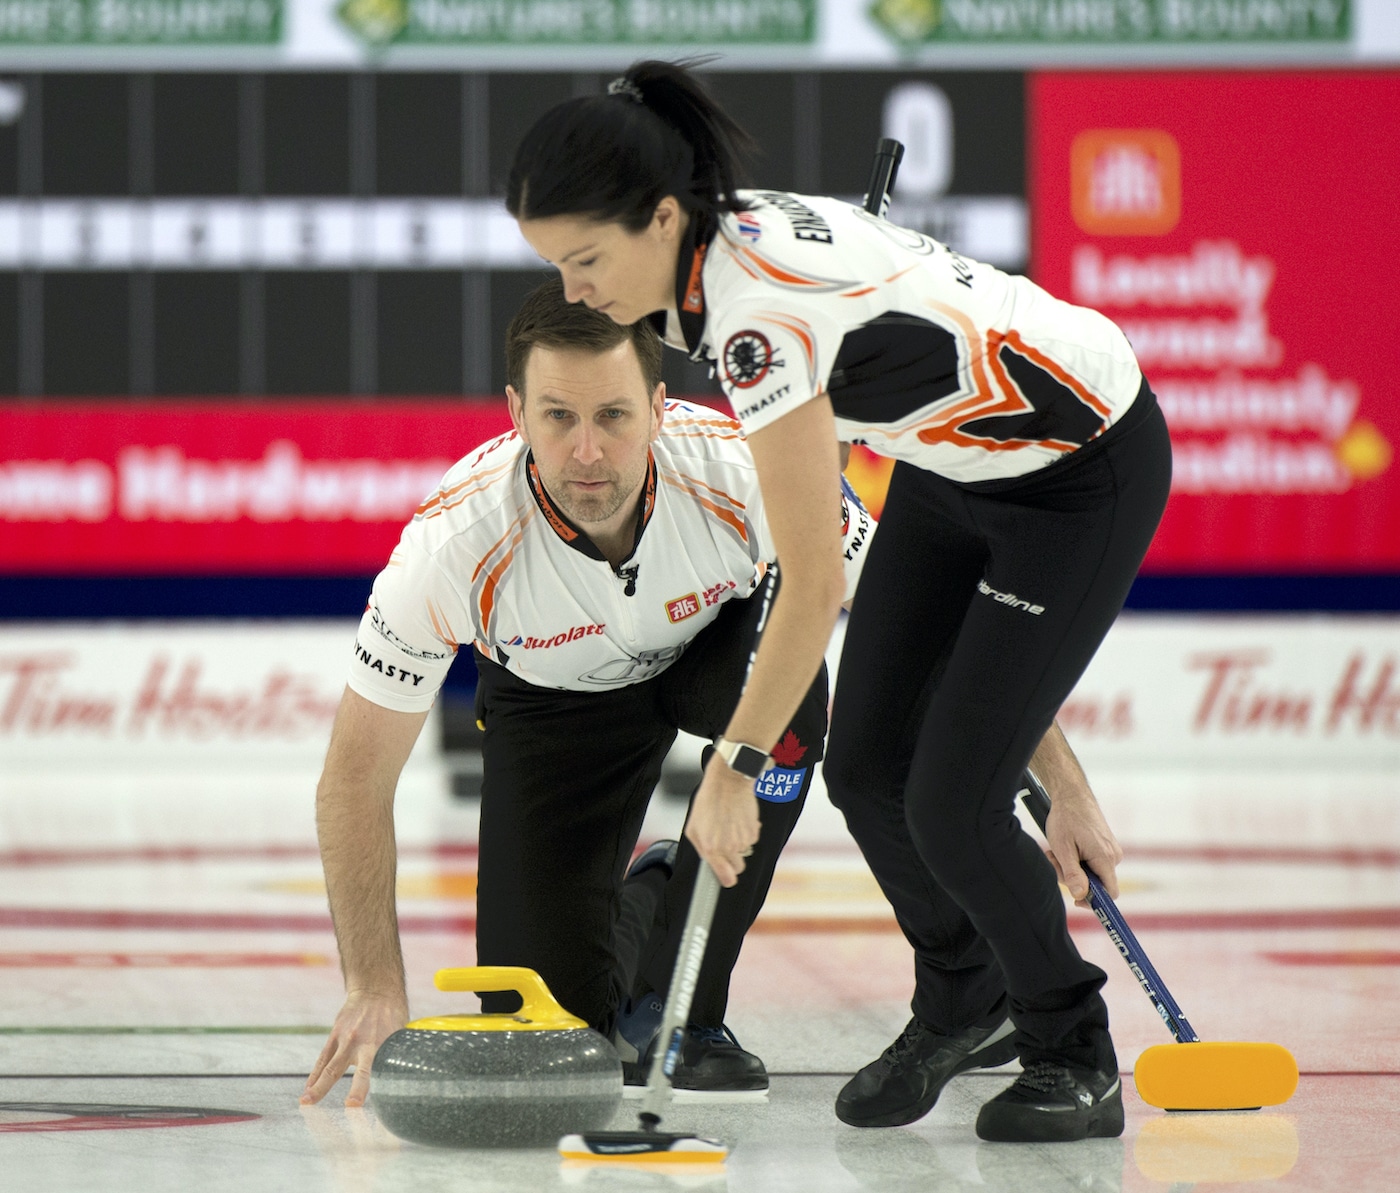 Einarson and Gushue on the hunt for Canada’s 1st Gold at World Mixed